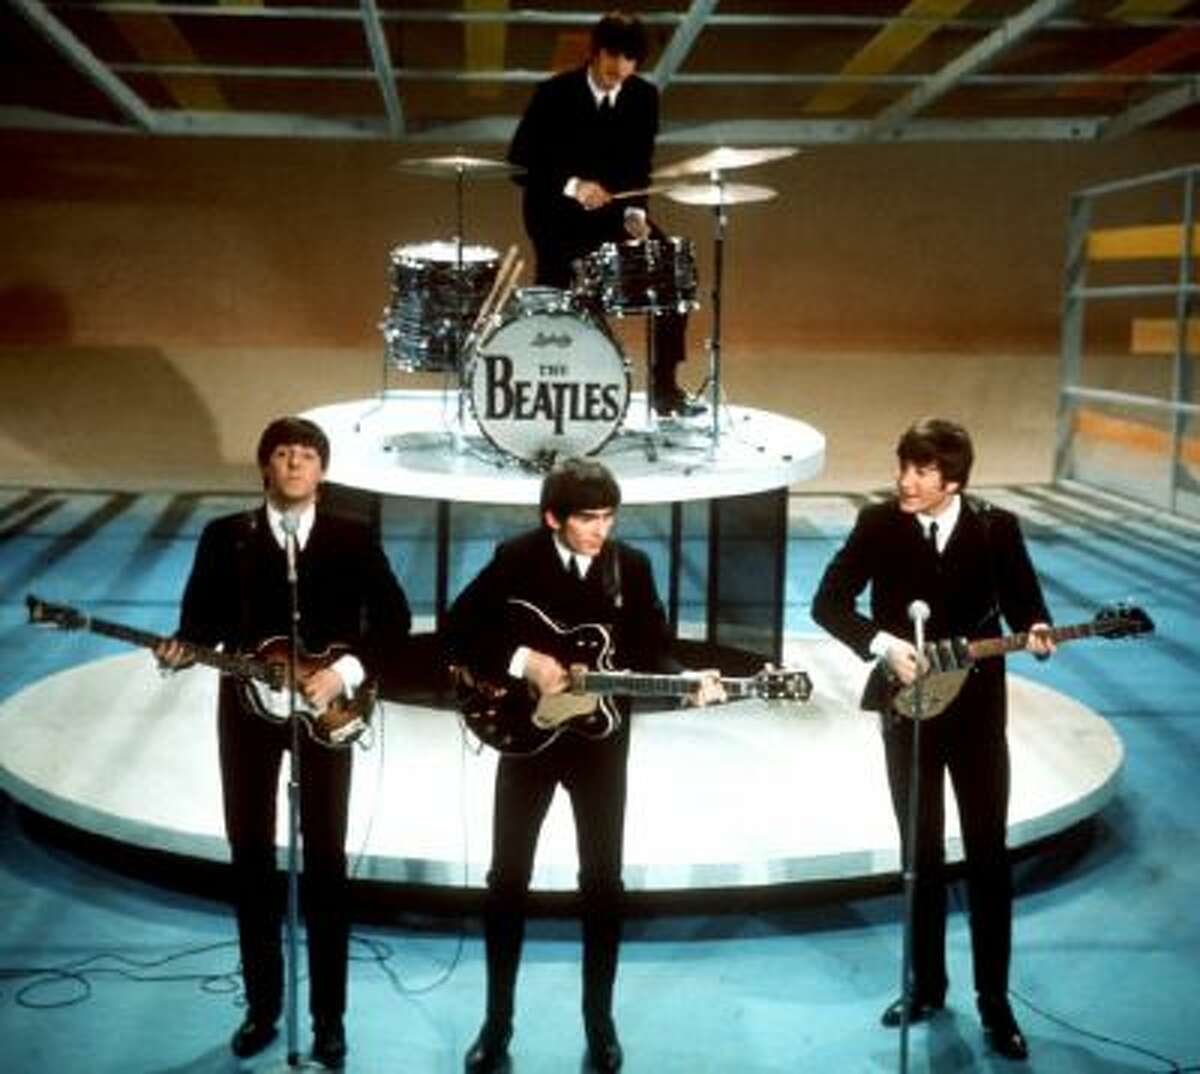 In this Feb. 9, 1964 photo, The Beatles, from left, Paul McCartney, George Harrison, Ringo Starr on drums, and John Lennon perform on the CBS "Ed Sullivan Show" in New York.